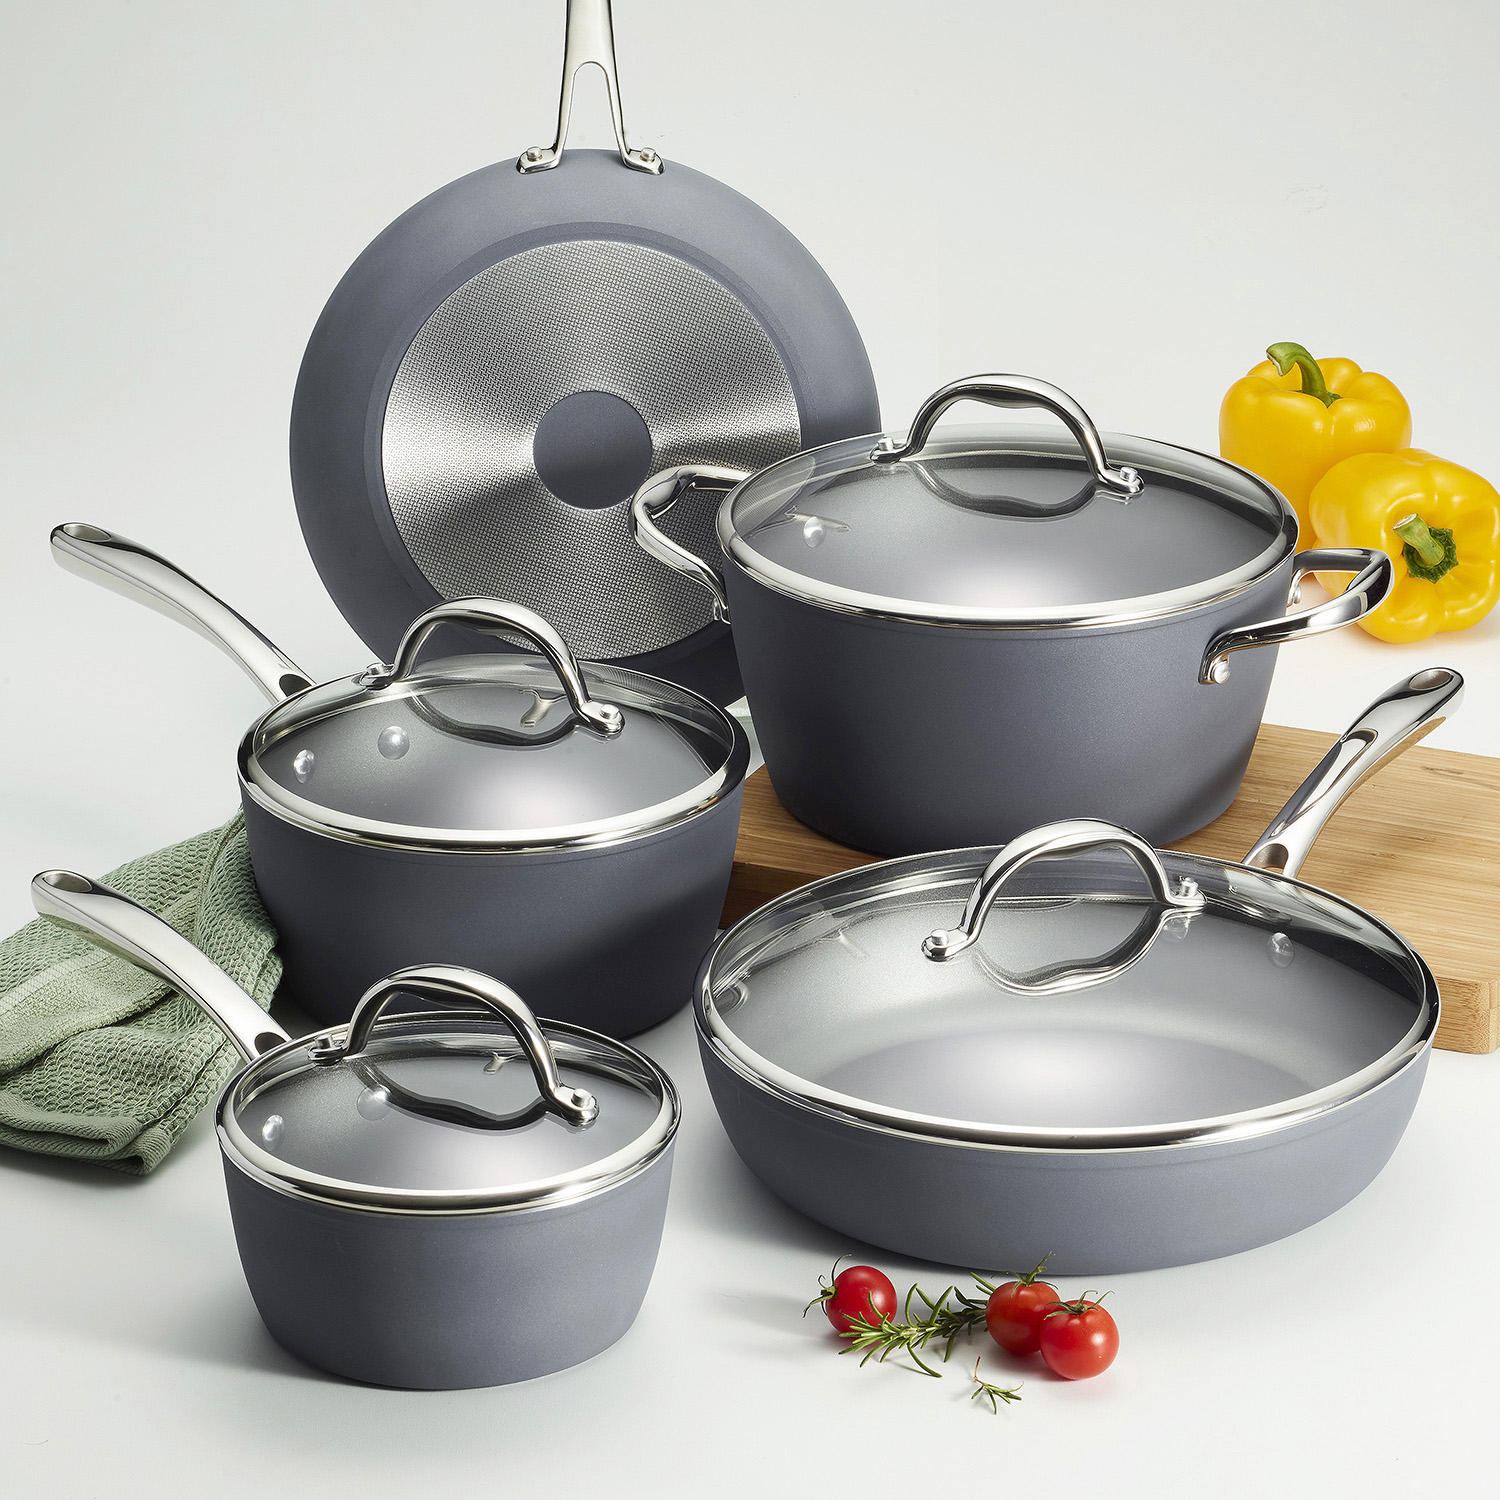 Tramontina 9-Piece Induction-Ready Nonstick Cookware Set